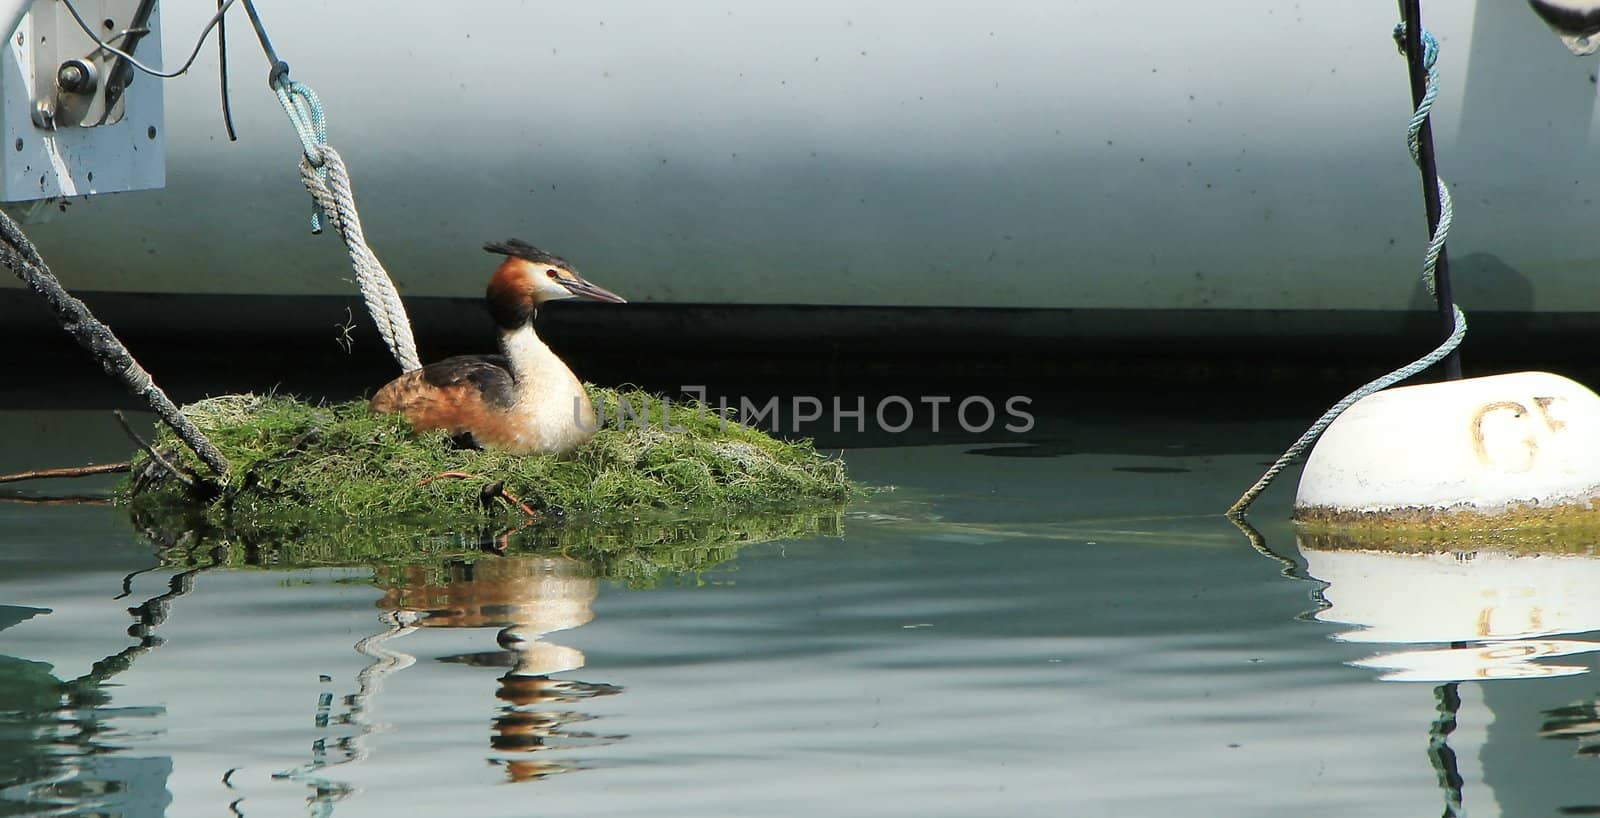 Great Crested Grebe (Podiceps cristatus) on its nest among boats